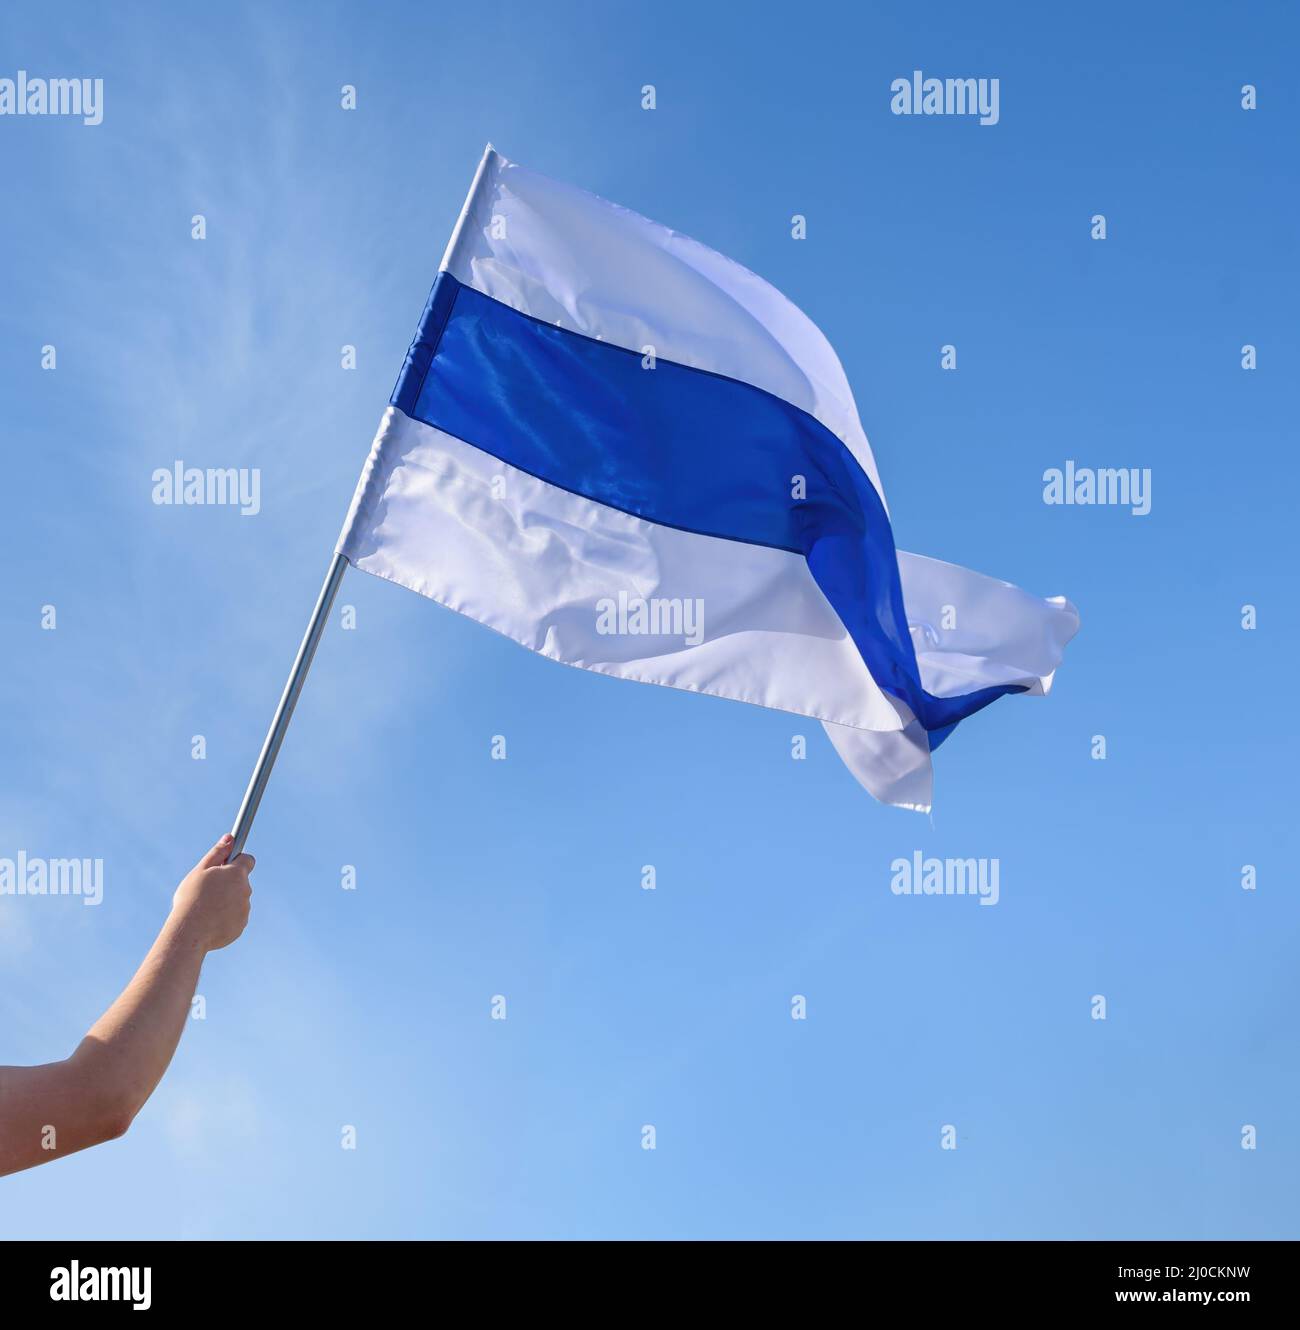 Hand holding white-blue-white flag used by Russian anti-war protesters against the 2022 Russian invasion of Ukraine Stock Photo